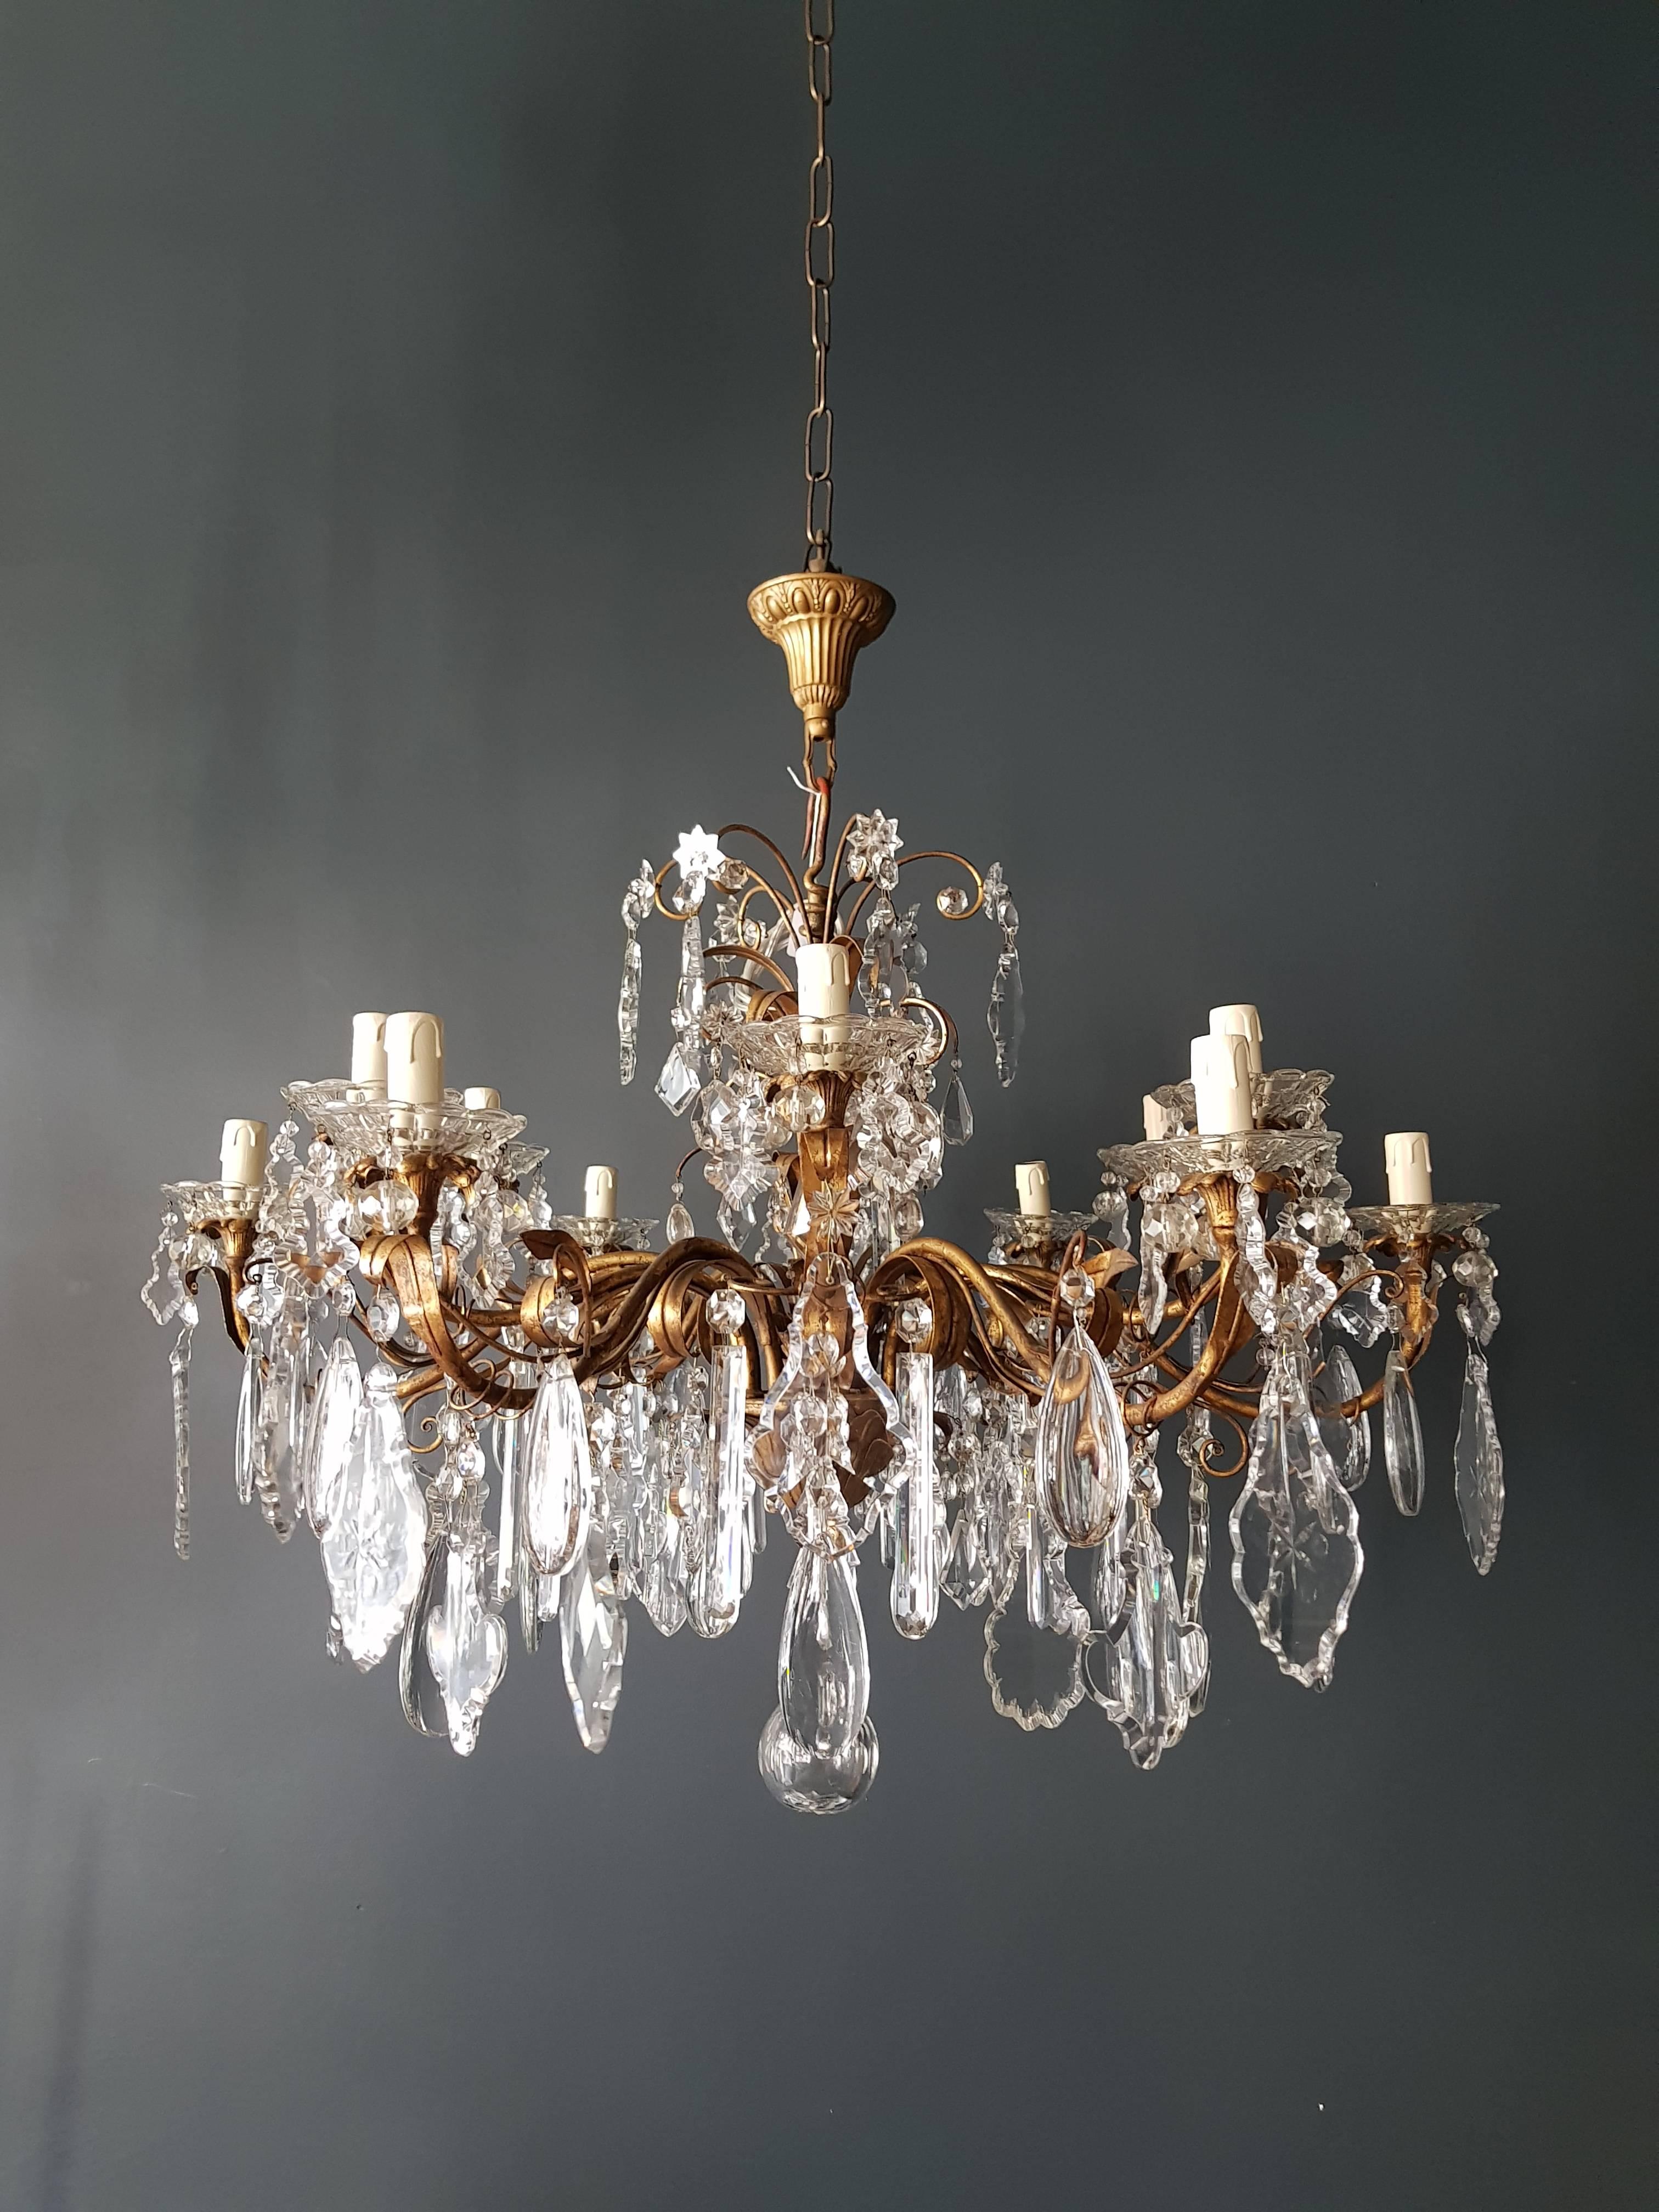 Crystal chandelier antique ceiling lamp Murano Florentiner Lustre Art Nouveau.

Measures: Total height 110 cm, height without chain 70 cm, diameter 90 cm. Weight (approximately): 18kg.

Number of lights: Twelve-light bulb sockets: eight x E14